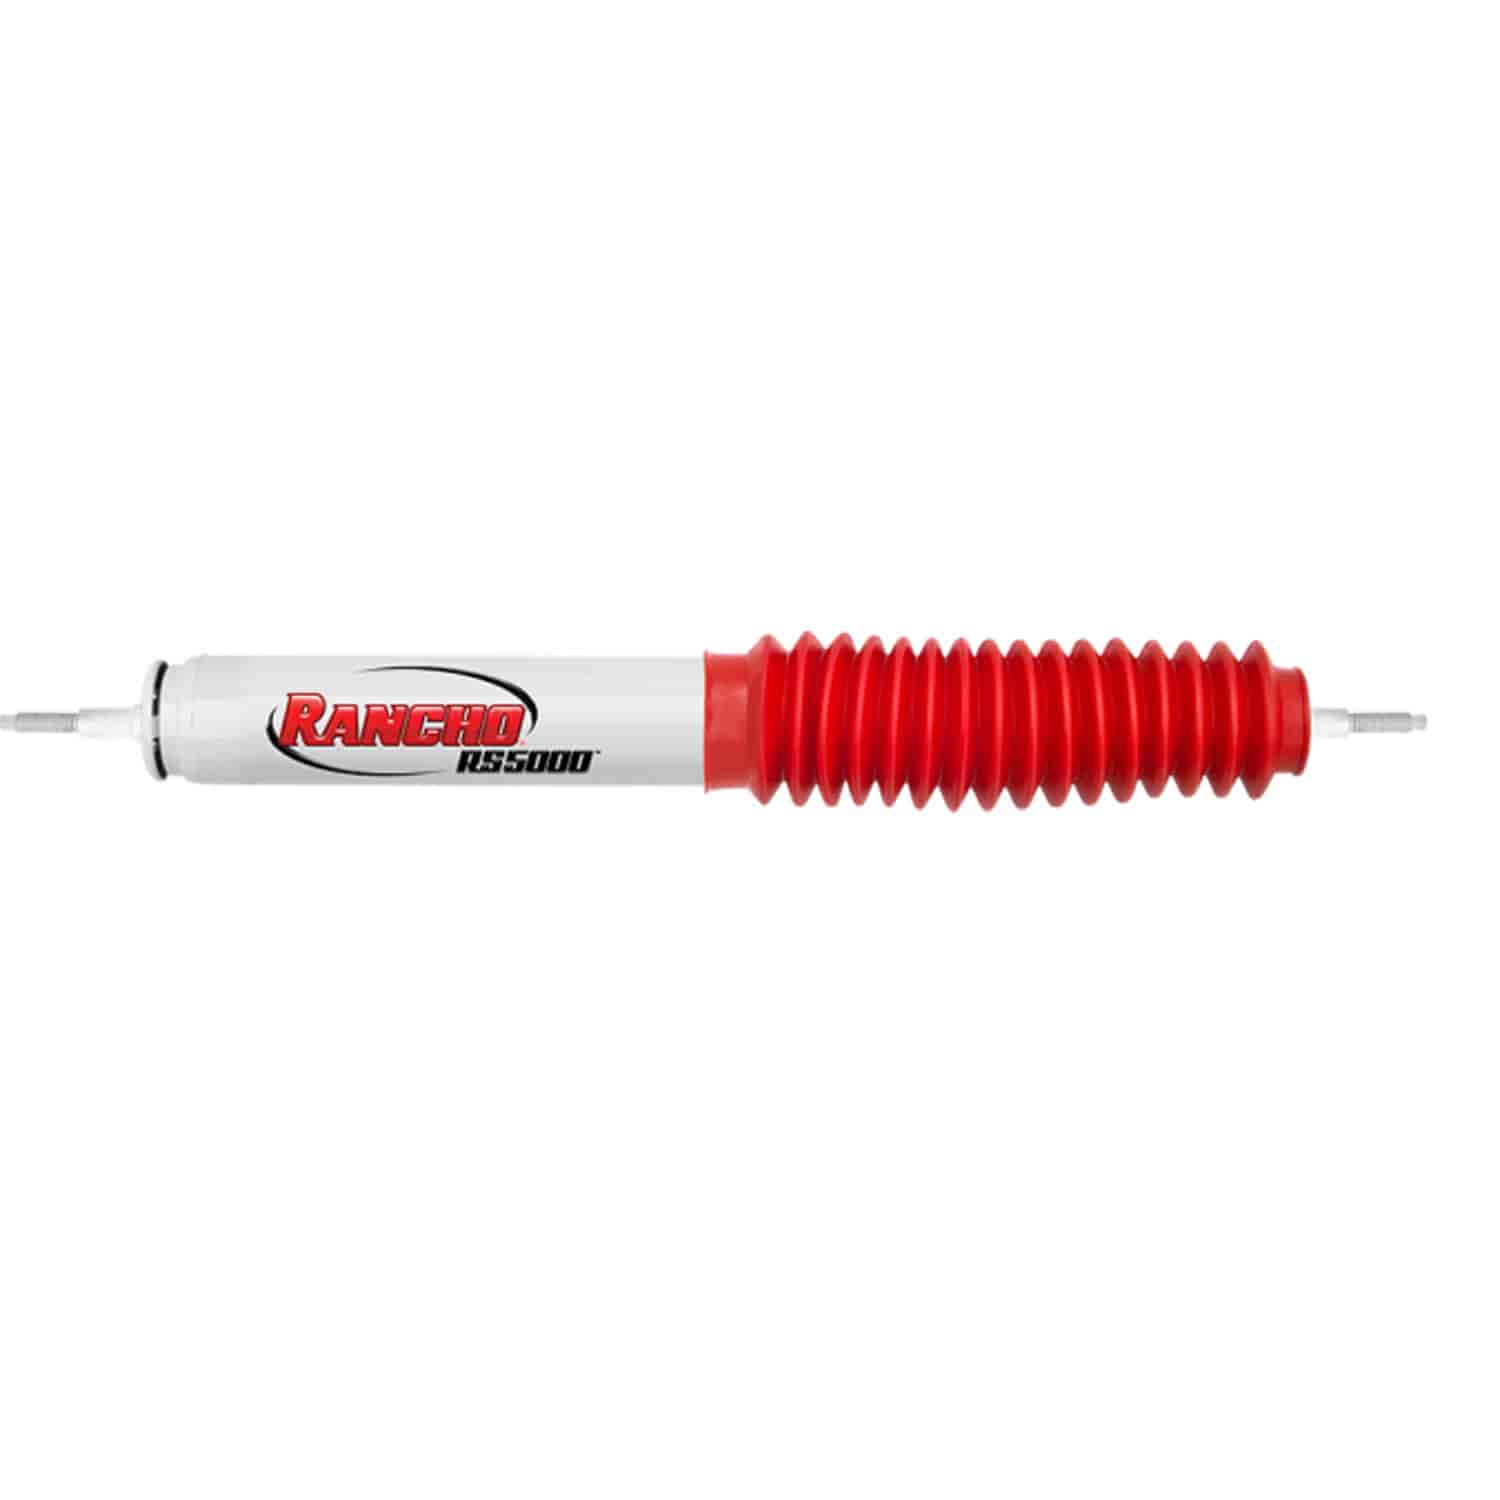 RS5000 Front Shock Absorber Fits Land Rover Range Rover, Defender and Discovery